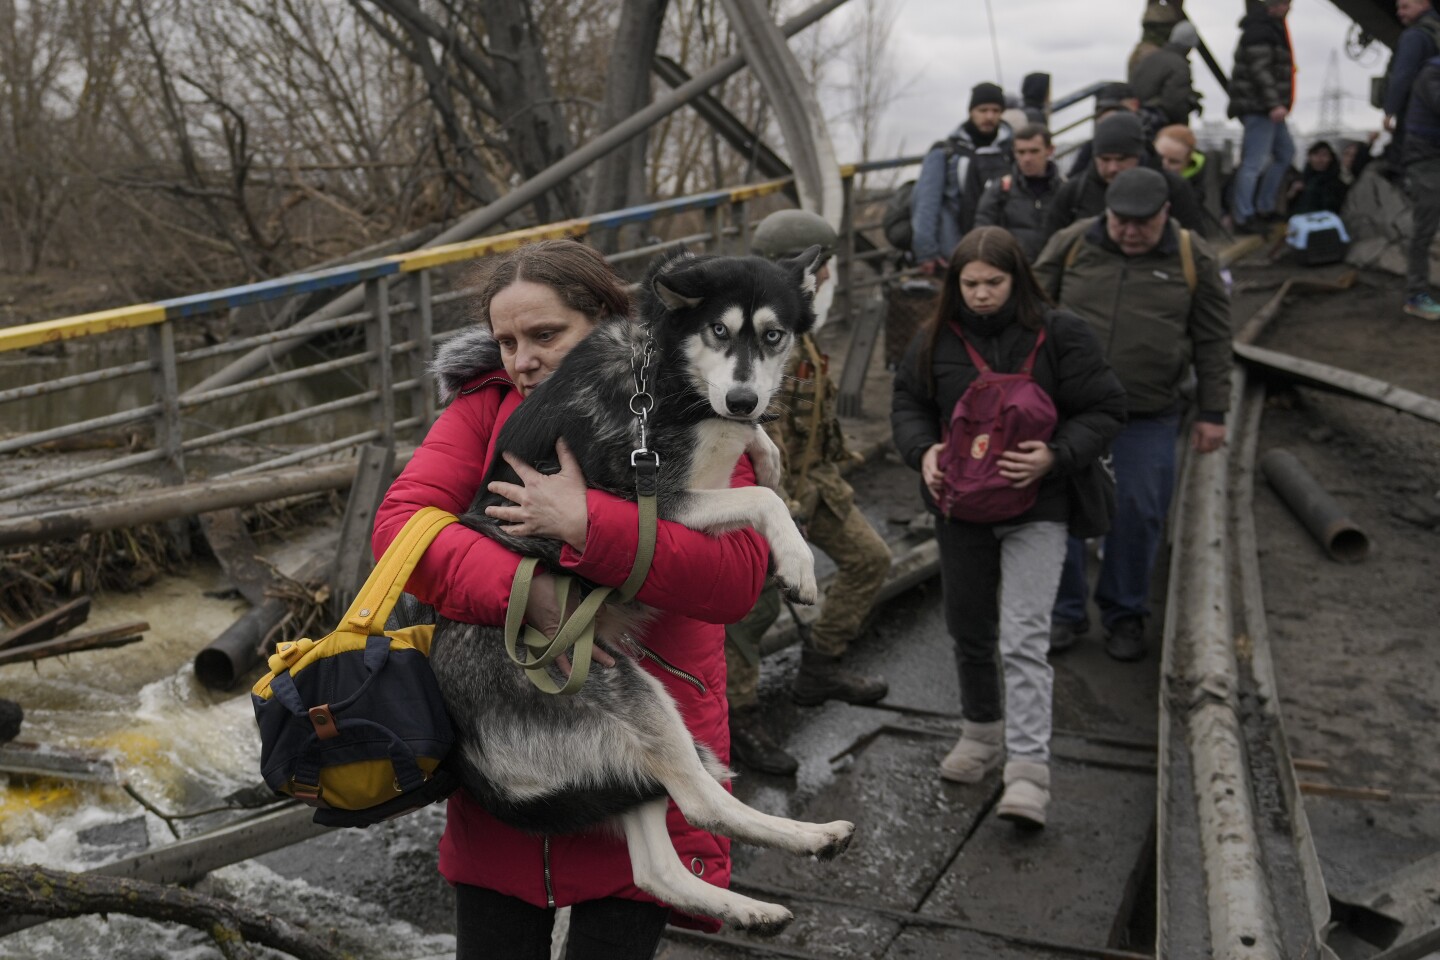 A woman holds a dog while crossing the Irpin River on an improvised path under a bridge that was destroyed by a Russian airstrike, while assisting people fleeing the town of Irpin, Ukraine, Saturday, March 5, 2022. (AP Photo/Vadim Ghirda)